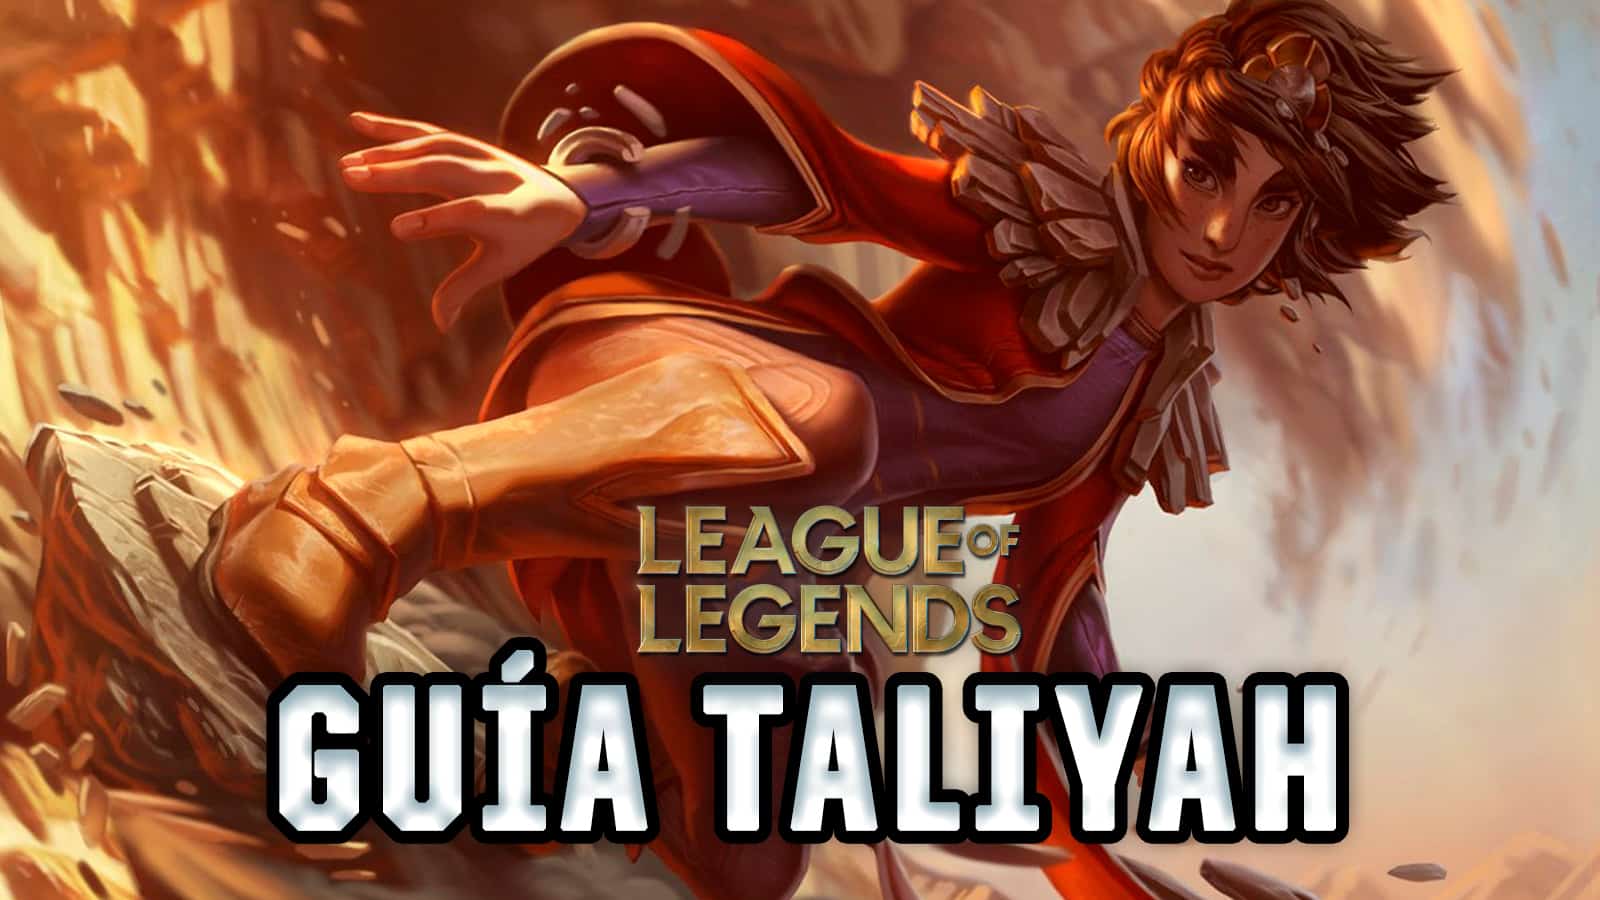 guía taliyah league of legends